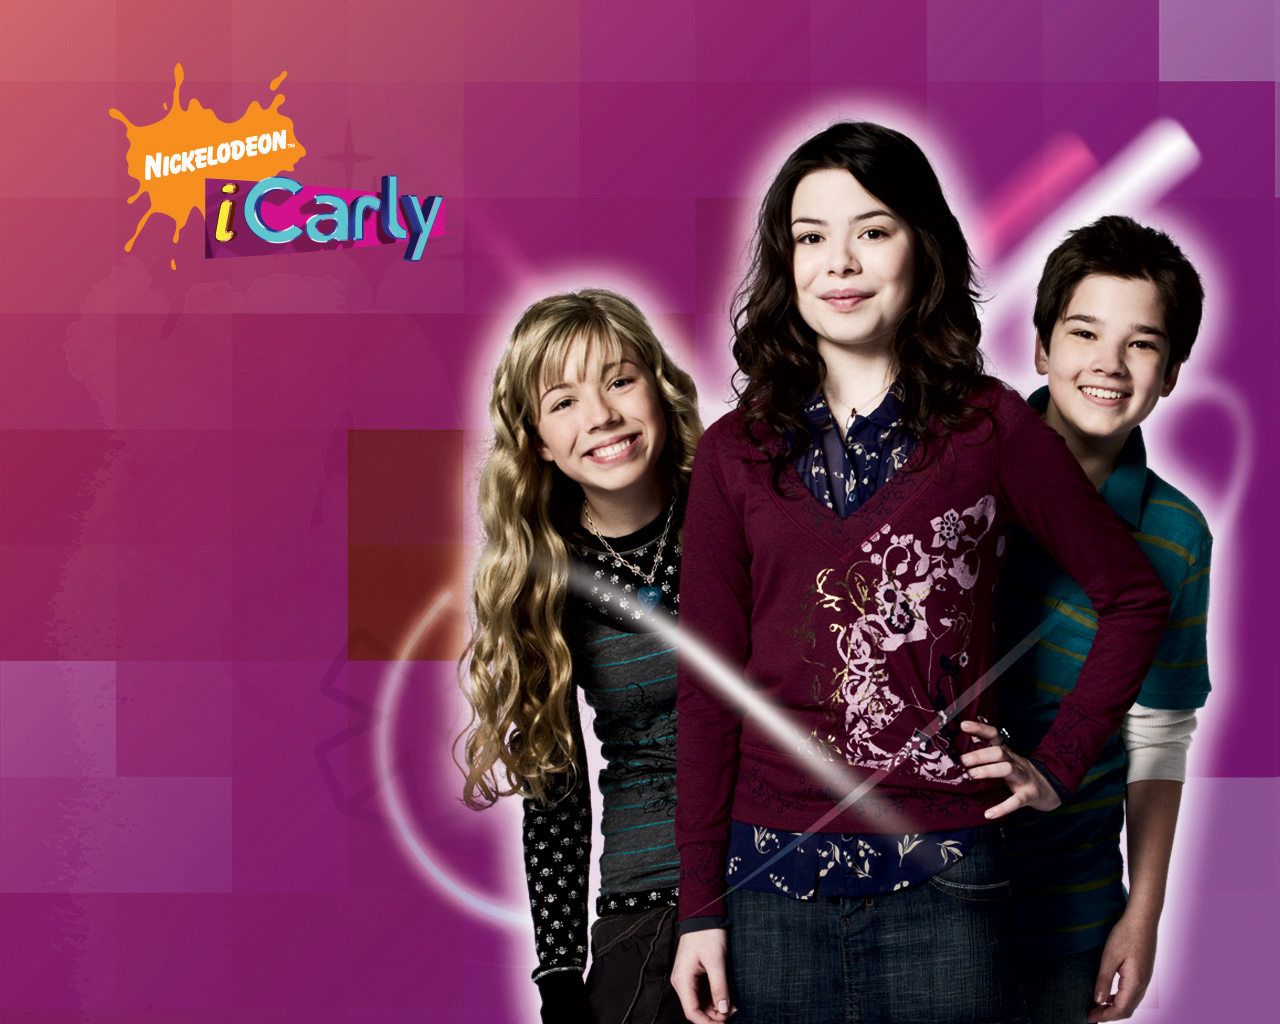 Icarly (2007) Wallpapers